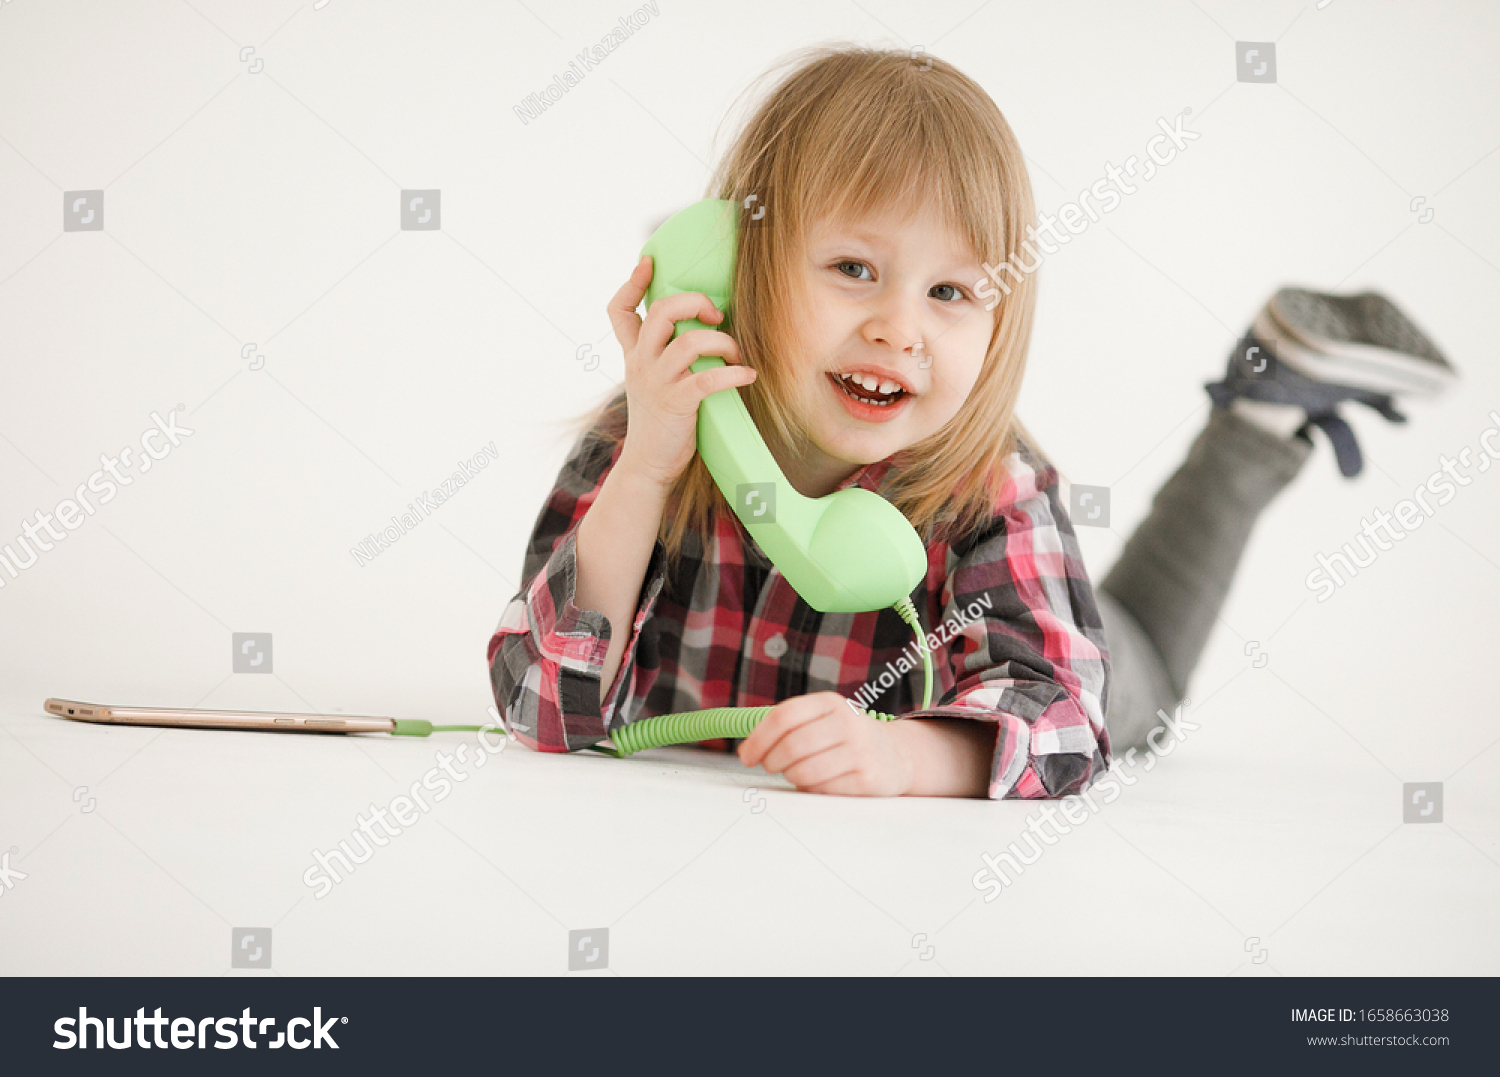 Emotional portrait of a cheerful and cheerful beautiful little girl looking with a smile out the window while talking on a telephone receiver connected to a smartphone, isolated on white background #1658663038